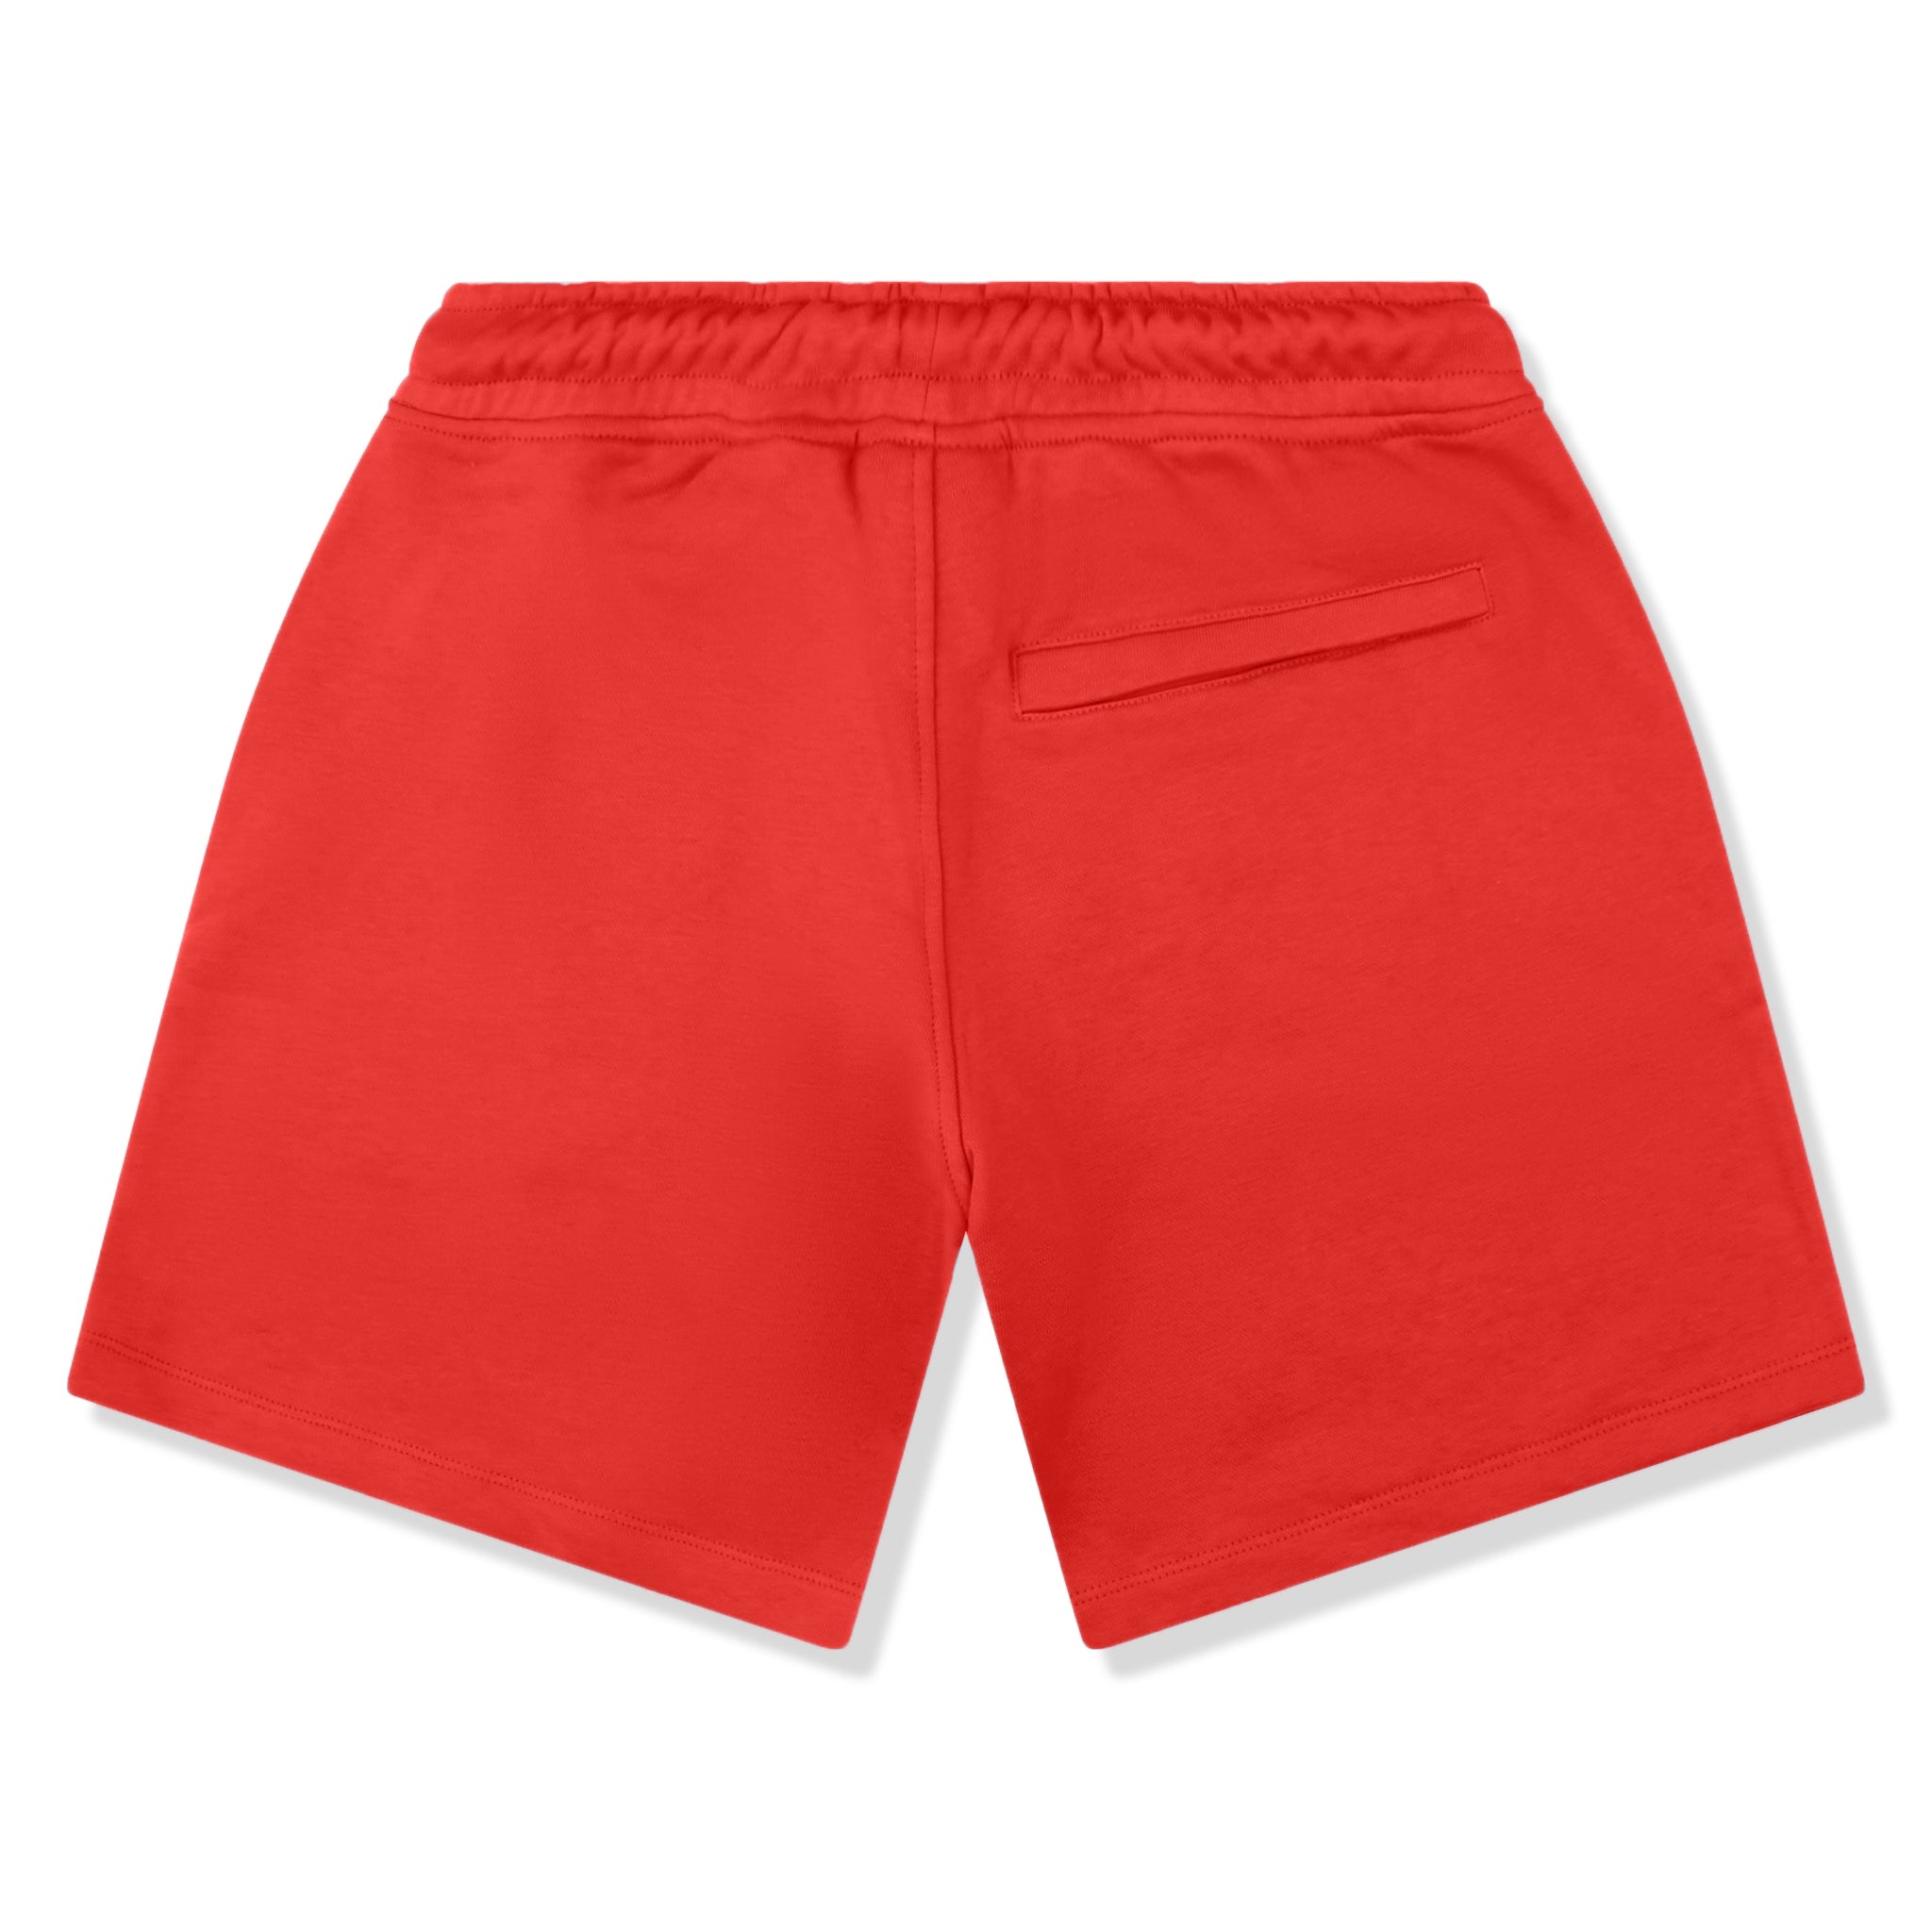 Back shorts view of Syna World Logo Red T-Shirt & Shorts SYNA-TEE-RED